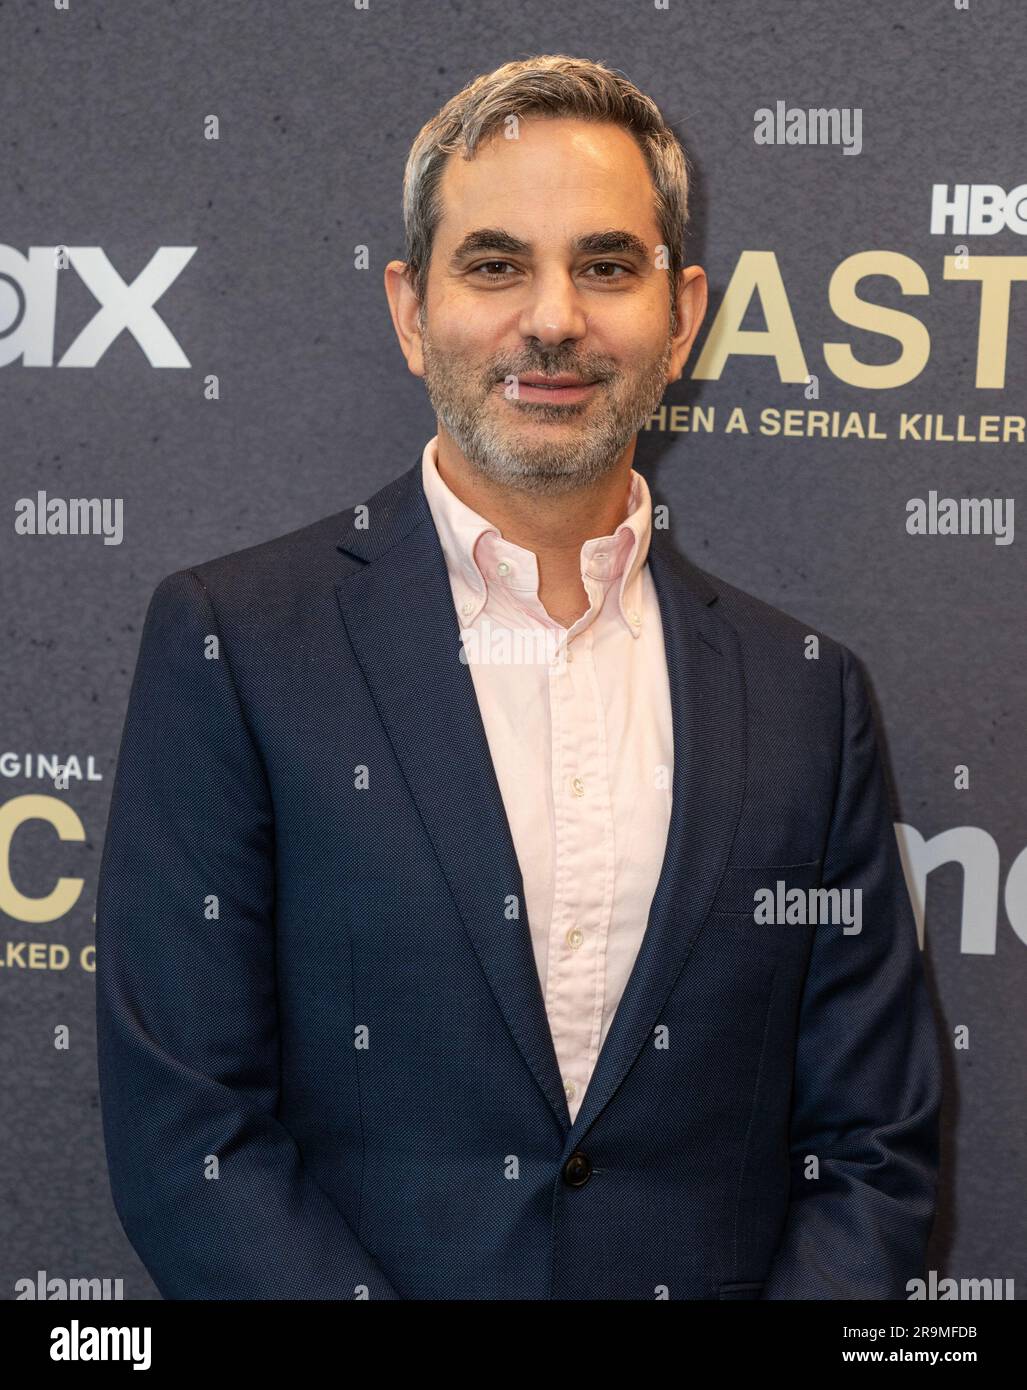 New York, USA. 27th June, 2023. Howard Gertler attends premiere of HBO documentary “LAST CALL: When A Serial Killer Stalked Queer New York” in New York HBO office on June 27, 2023. (Photo by Lev Radin/Sipa USA) Credit: Sipa USA/Alamy Live News Stock Photo